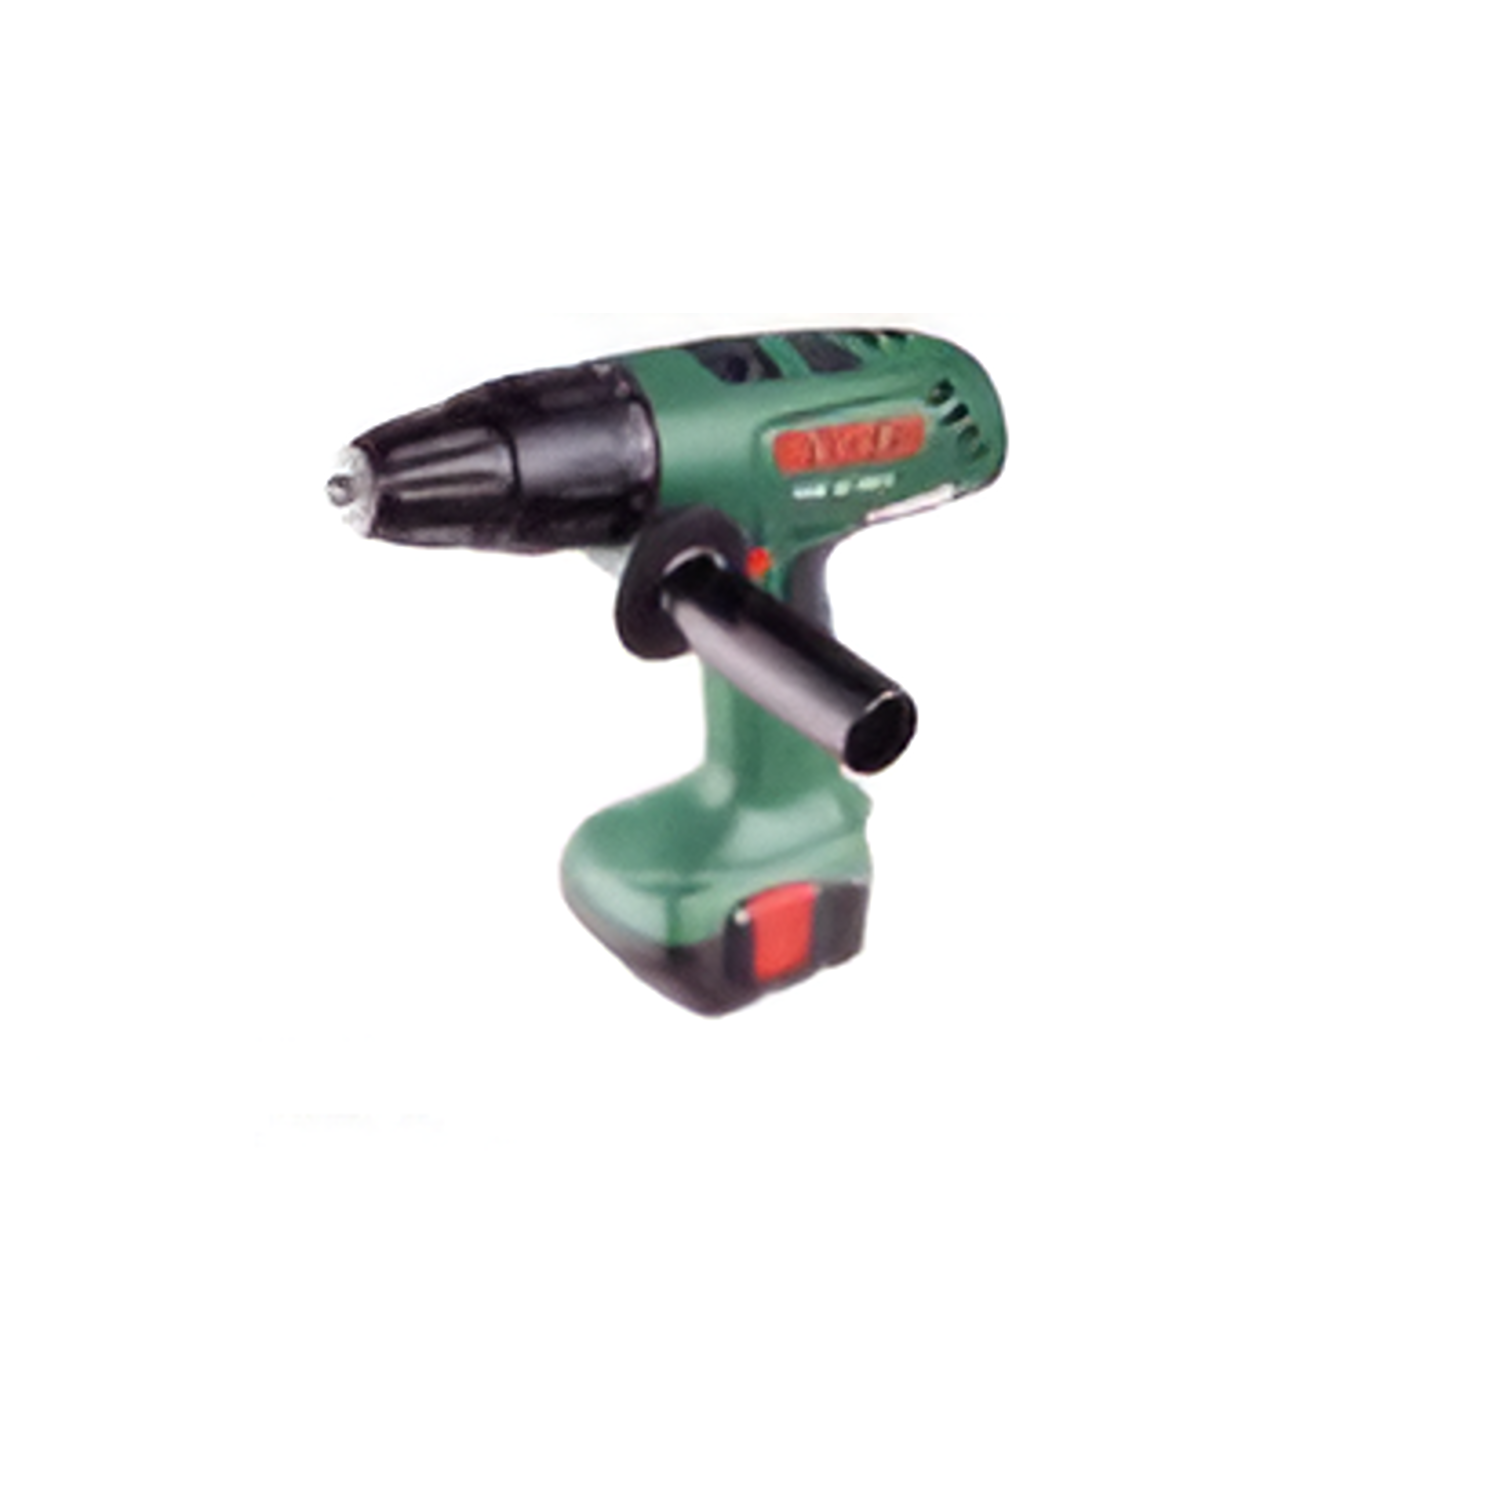 YEW AIK AC01118 Battery Impact Drill Power Tools PSB 12 VE-2 - Premium Power Tools from YEW AIK - Shop now at Yew Aik.